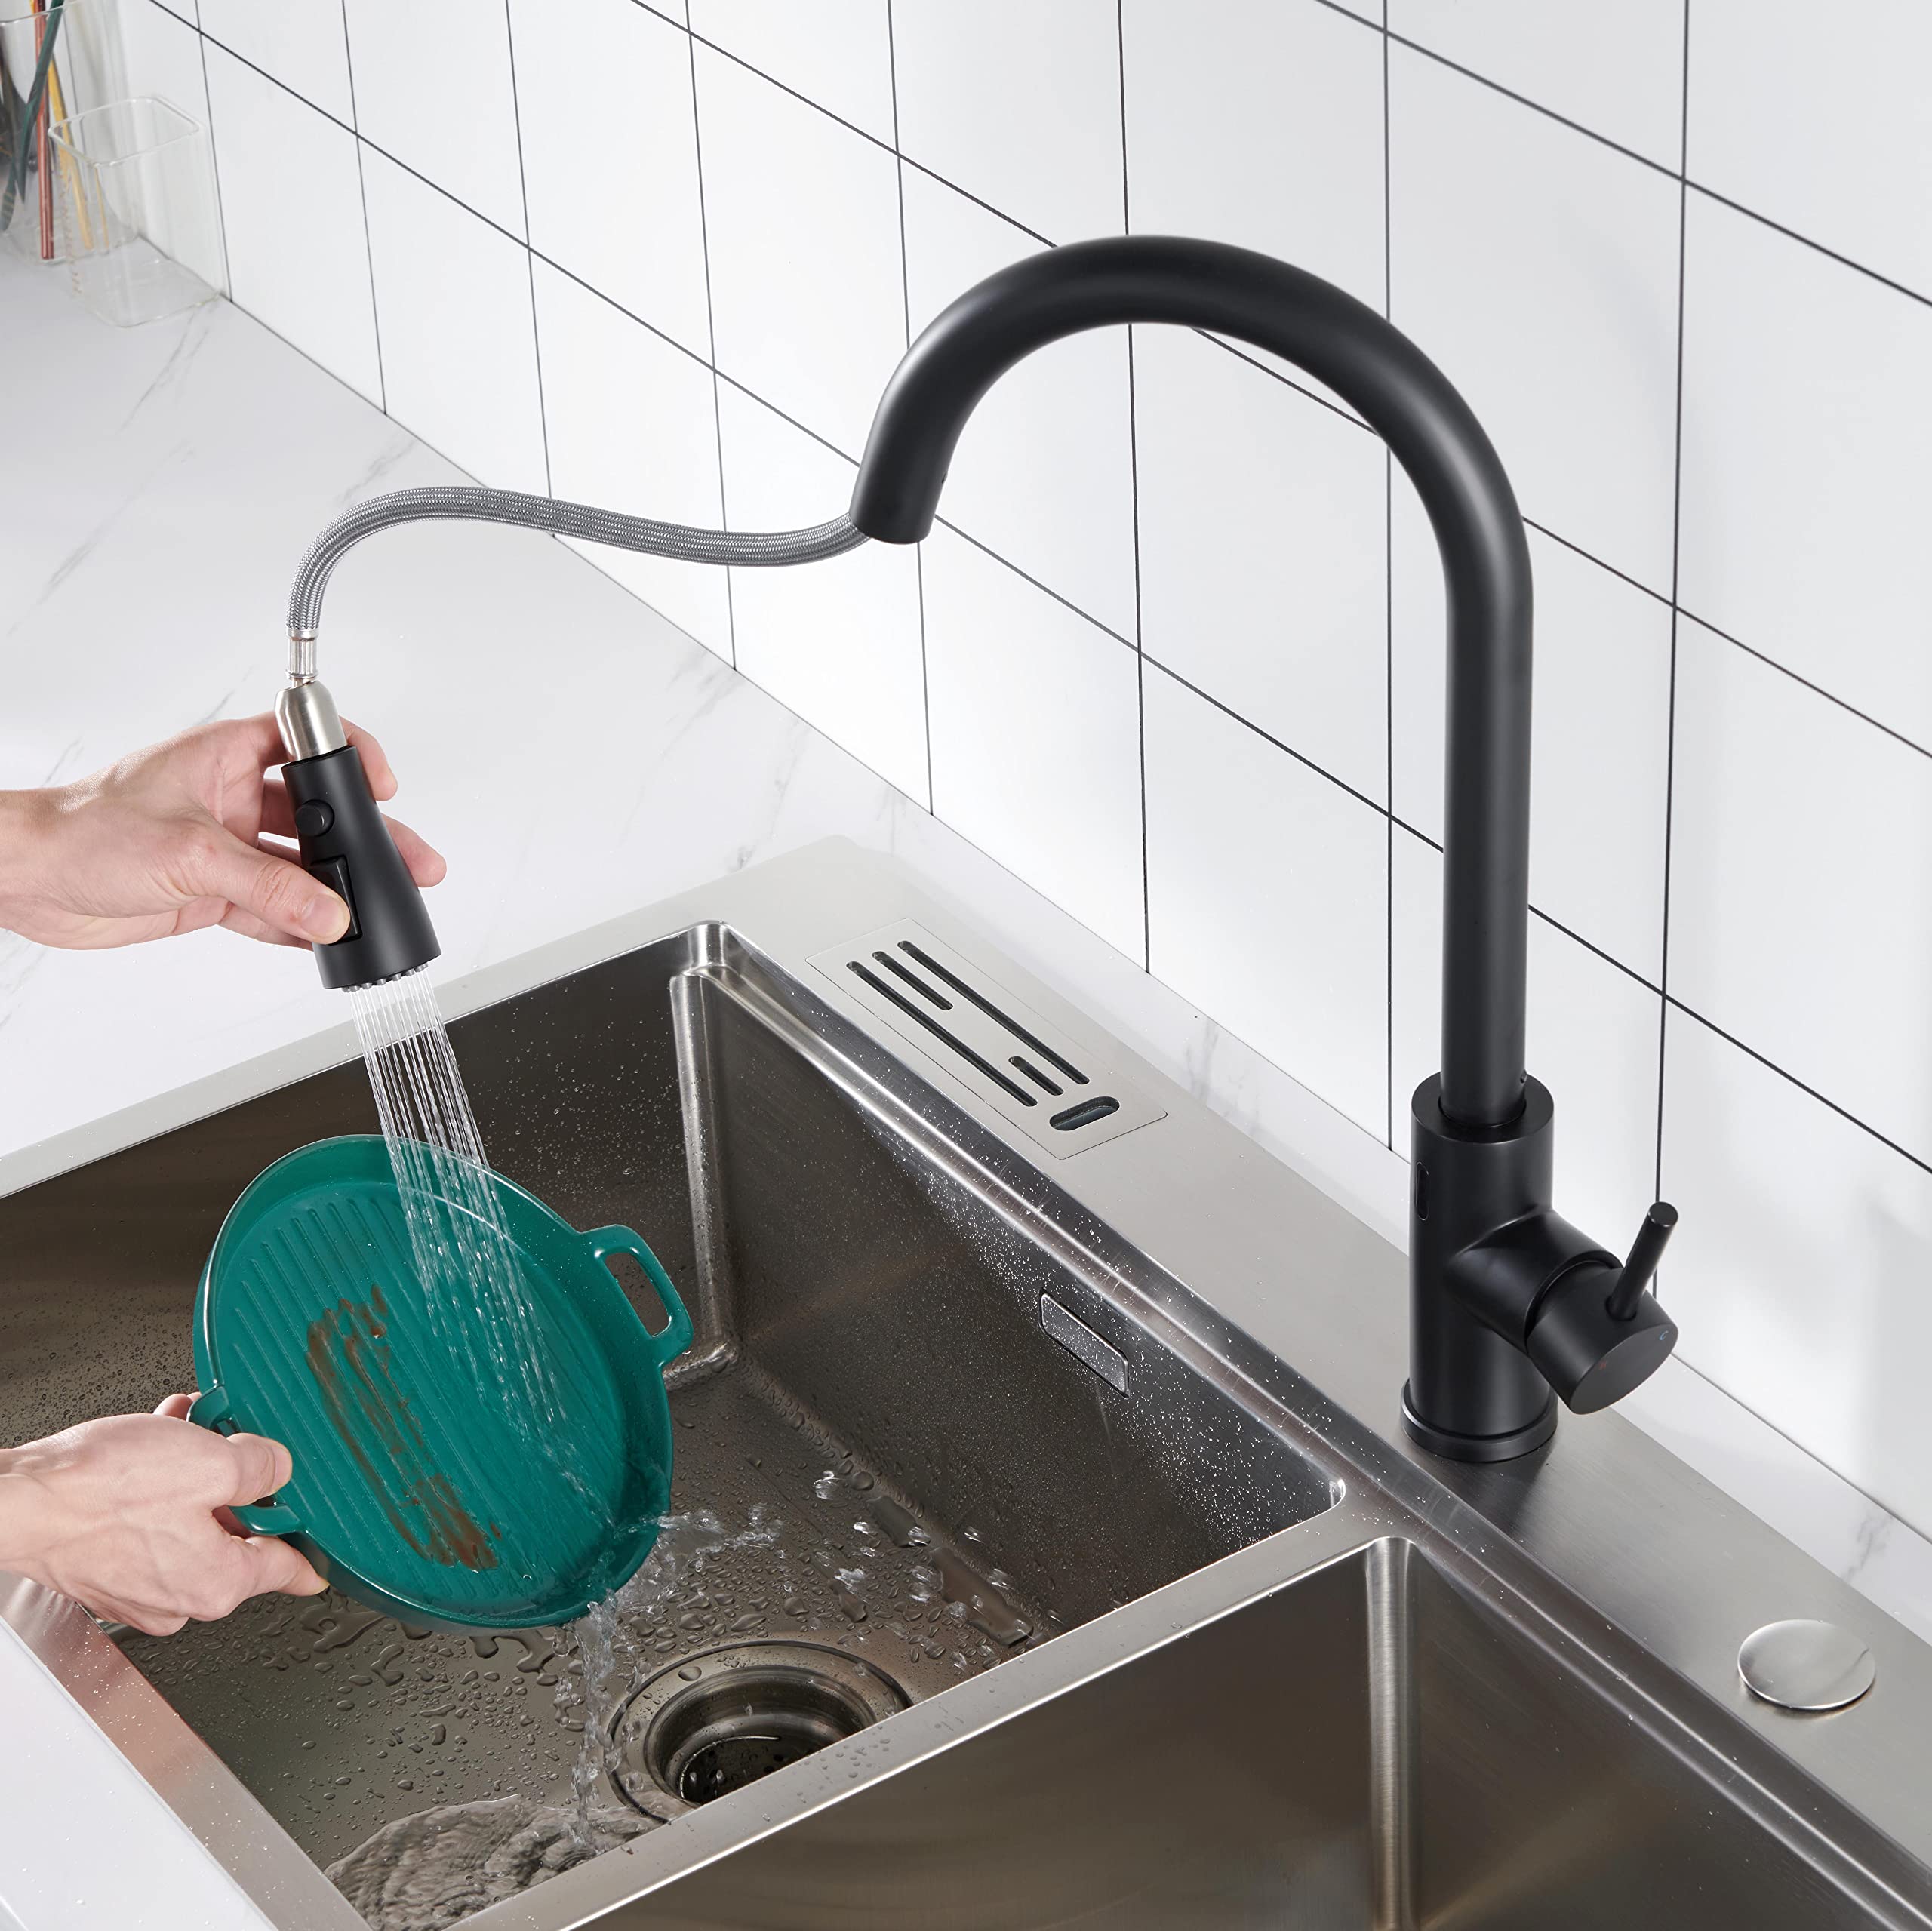 Gangang Touchless Kitchen Faucet with Pull Out Sprayer, Matte Black High Arc Single Handle Single Hole Commercial Kitchen Sink Faucet